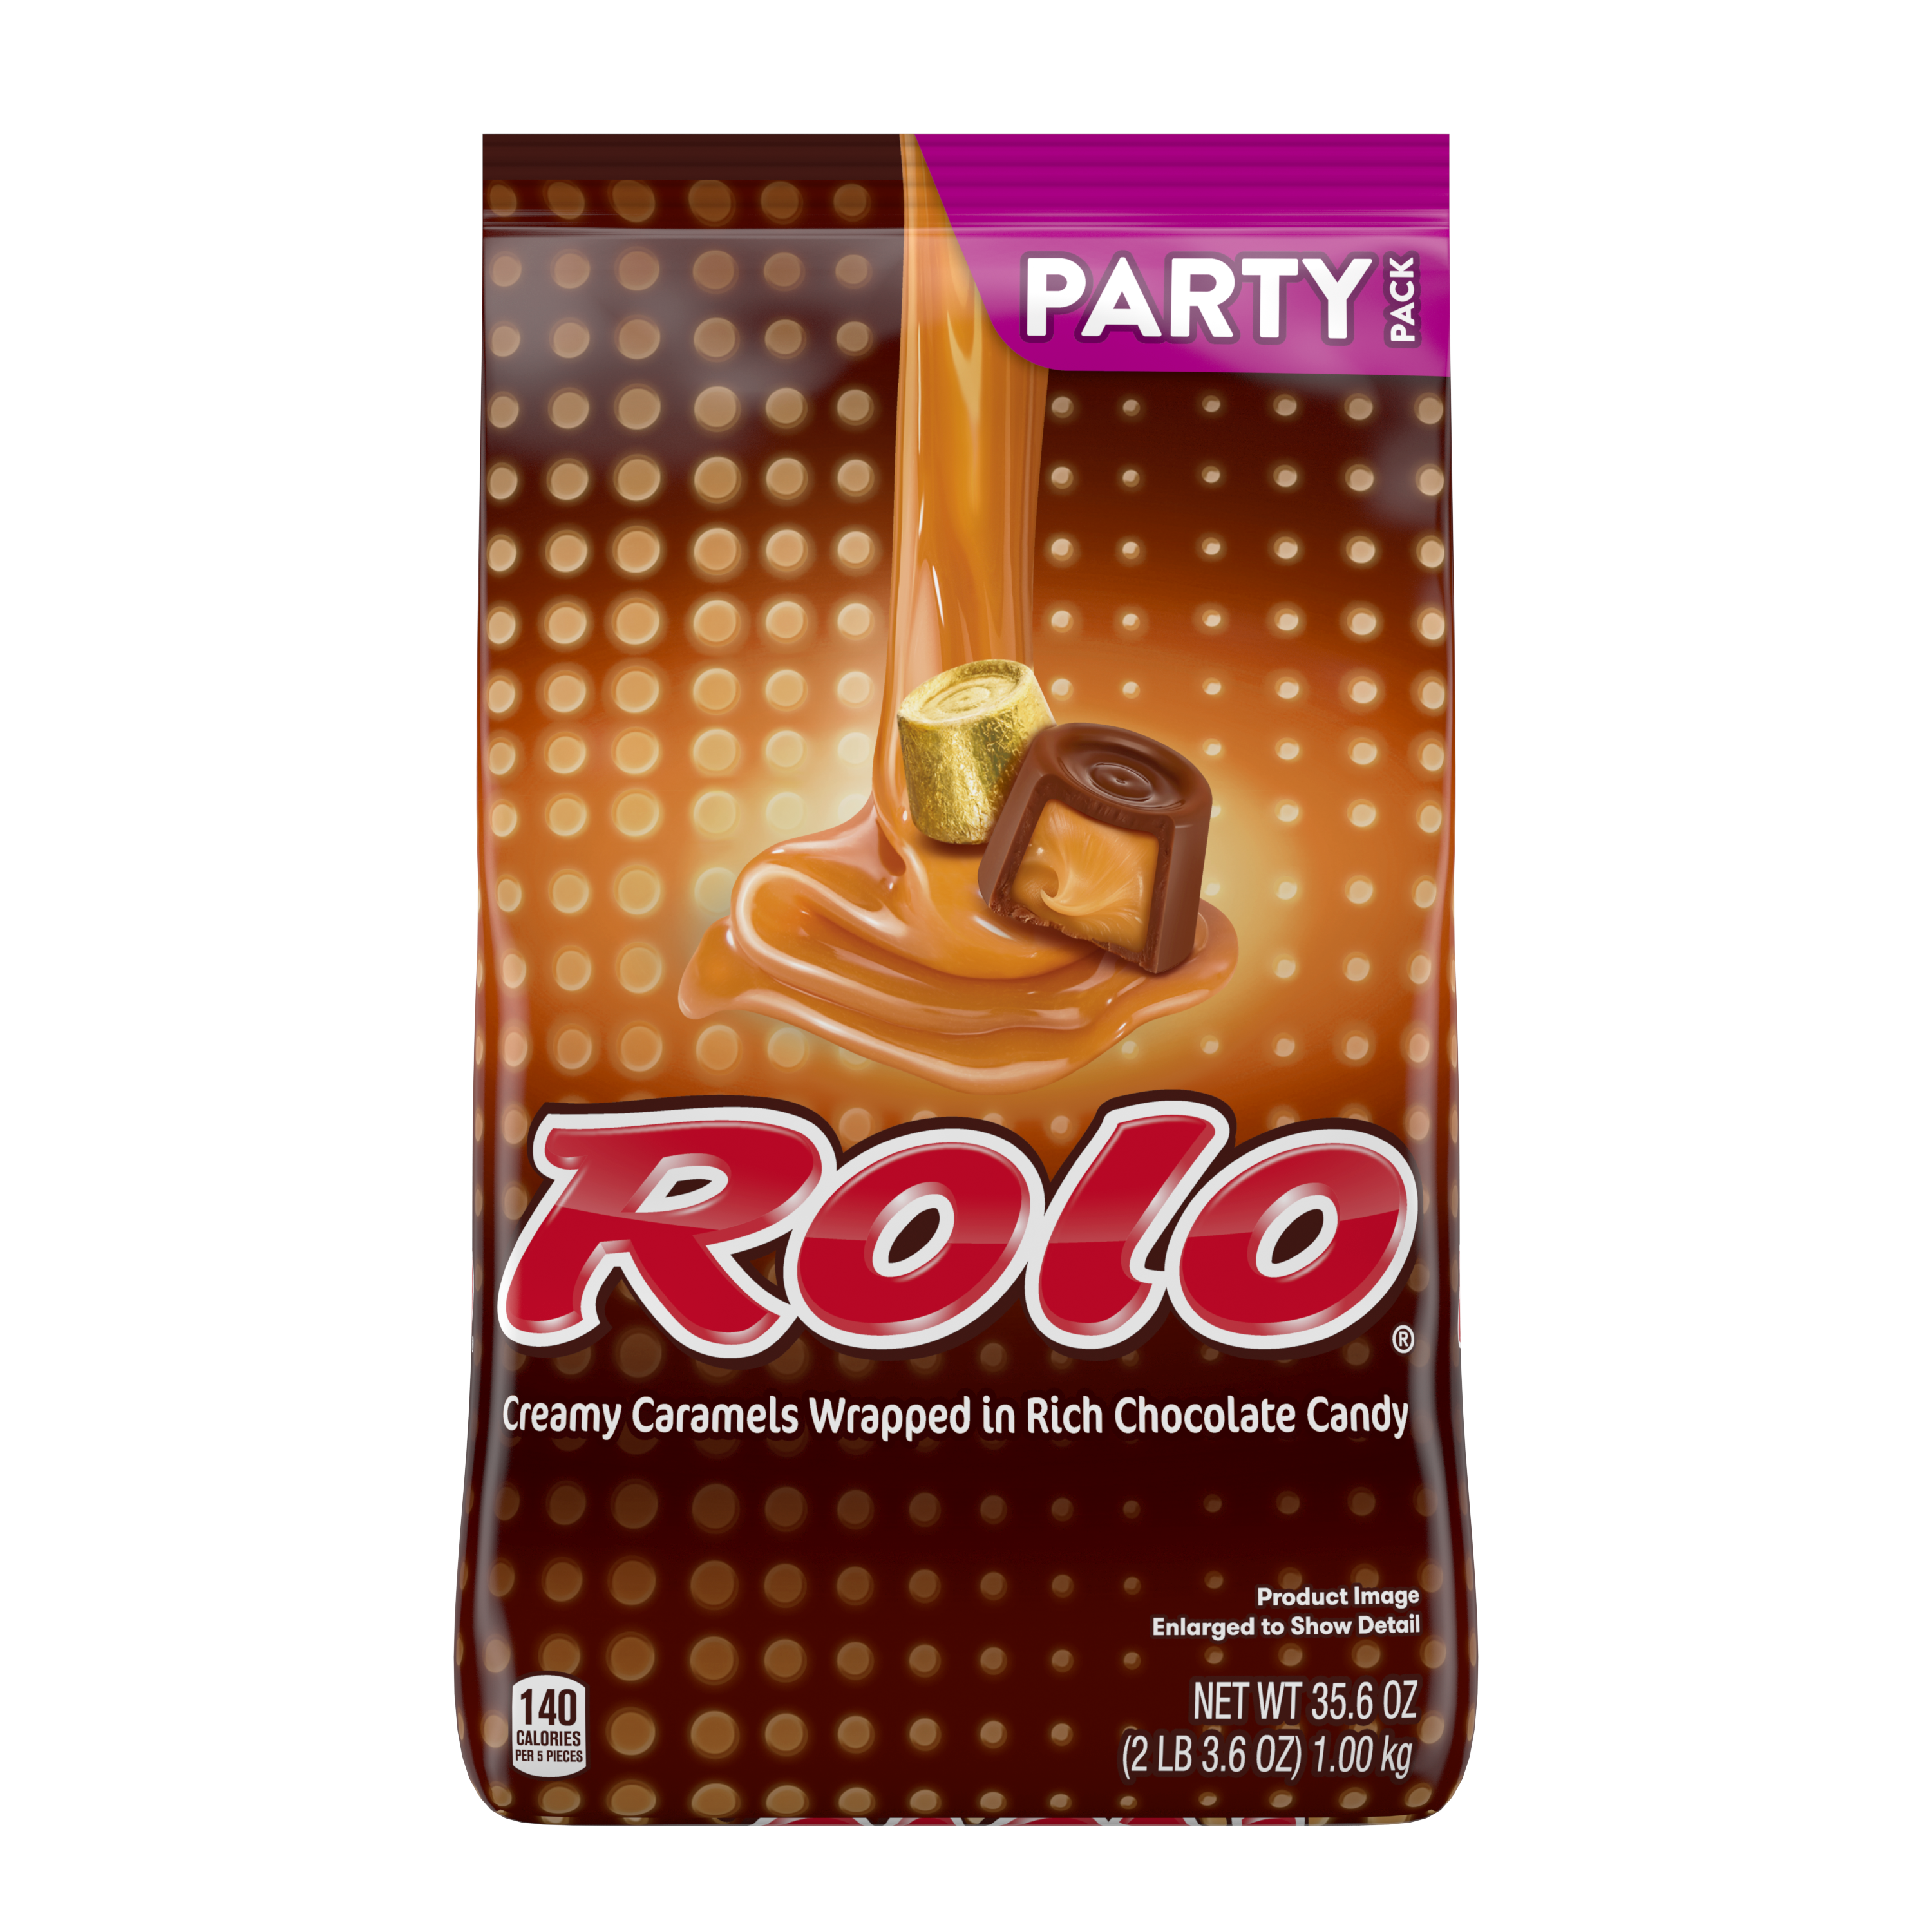 ROLO® Creamy Caramels in Rich Chocolate Candy, 35.6 oz pack - Front of Package